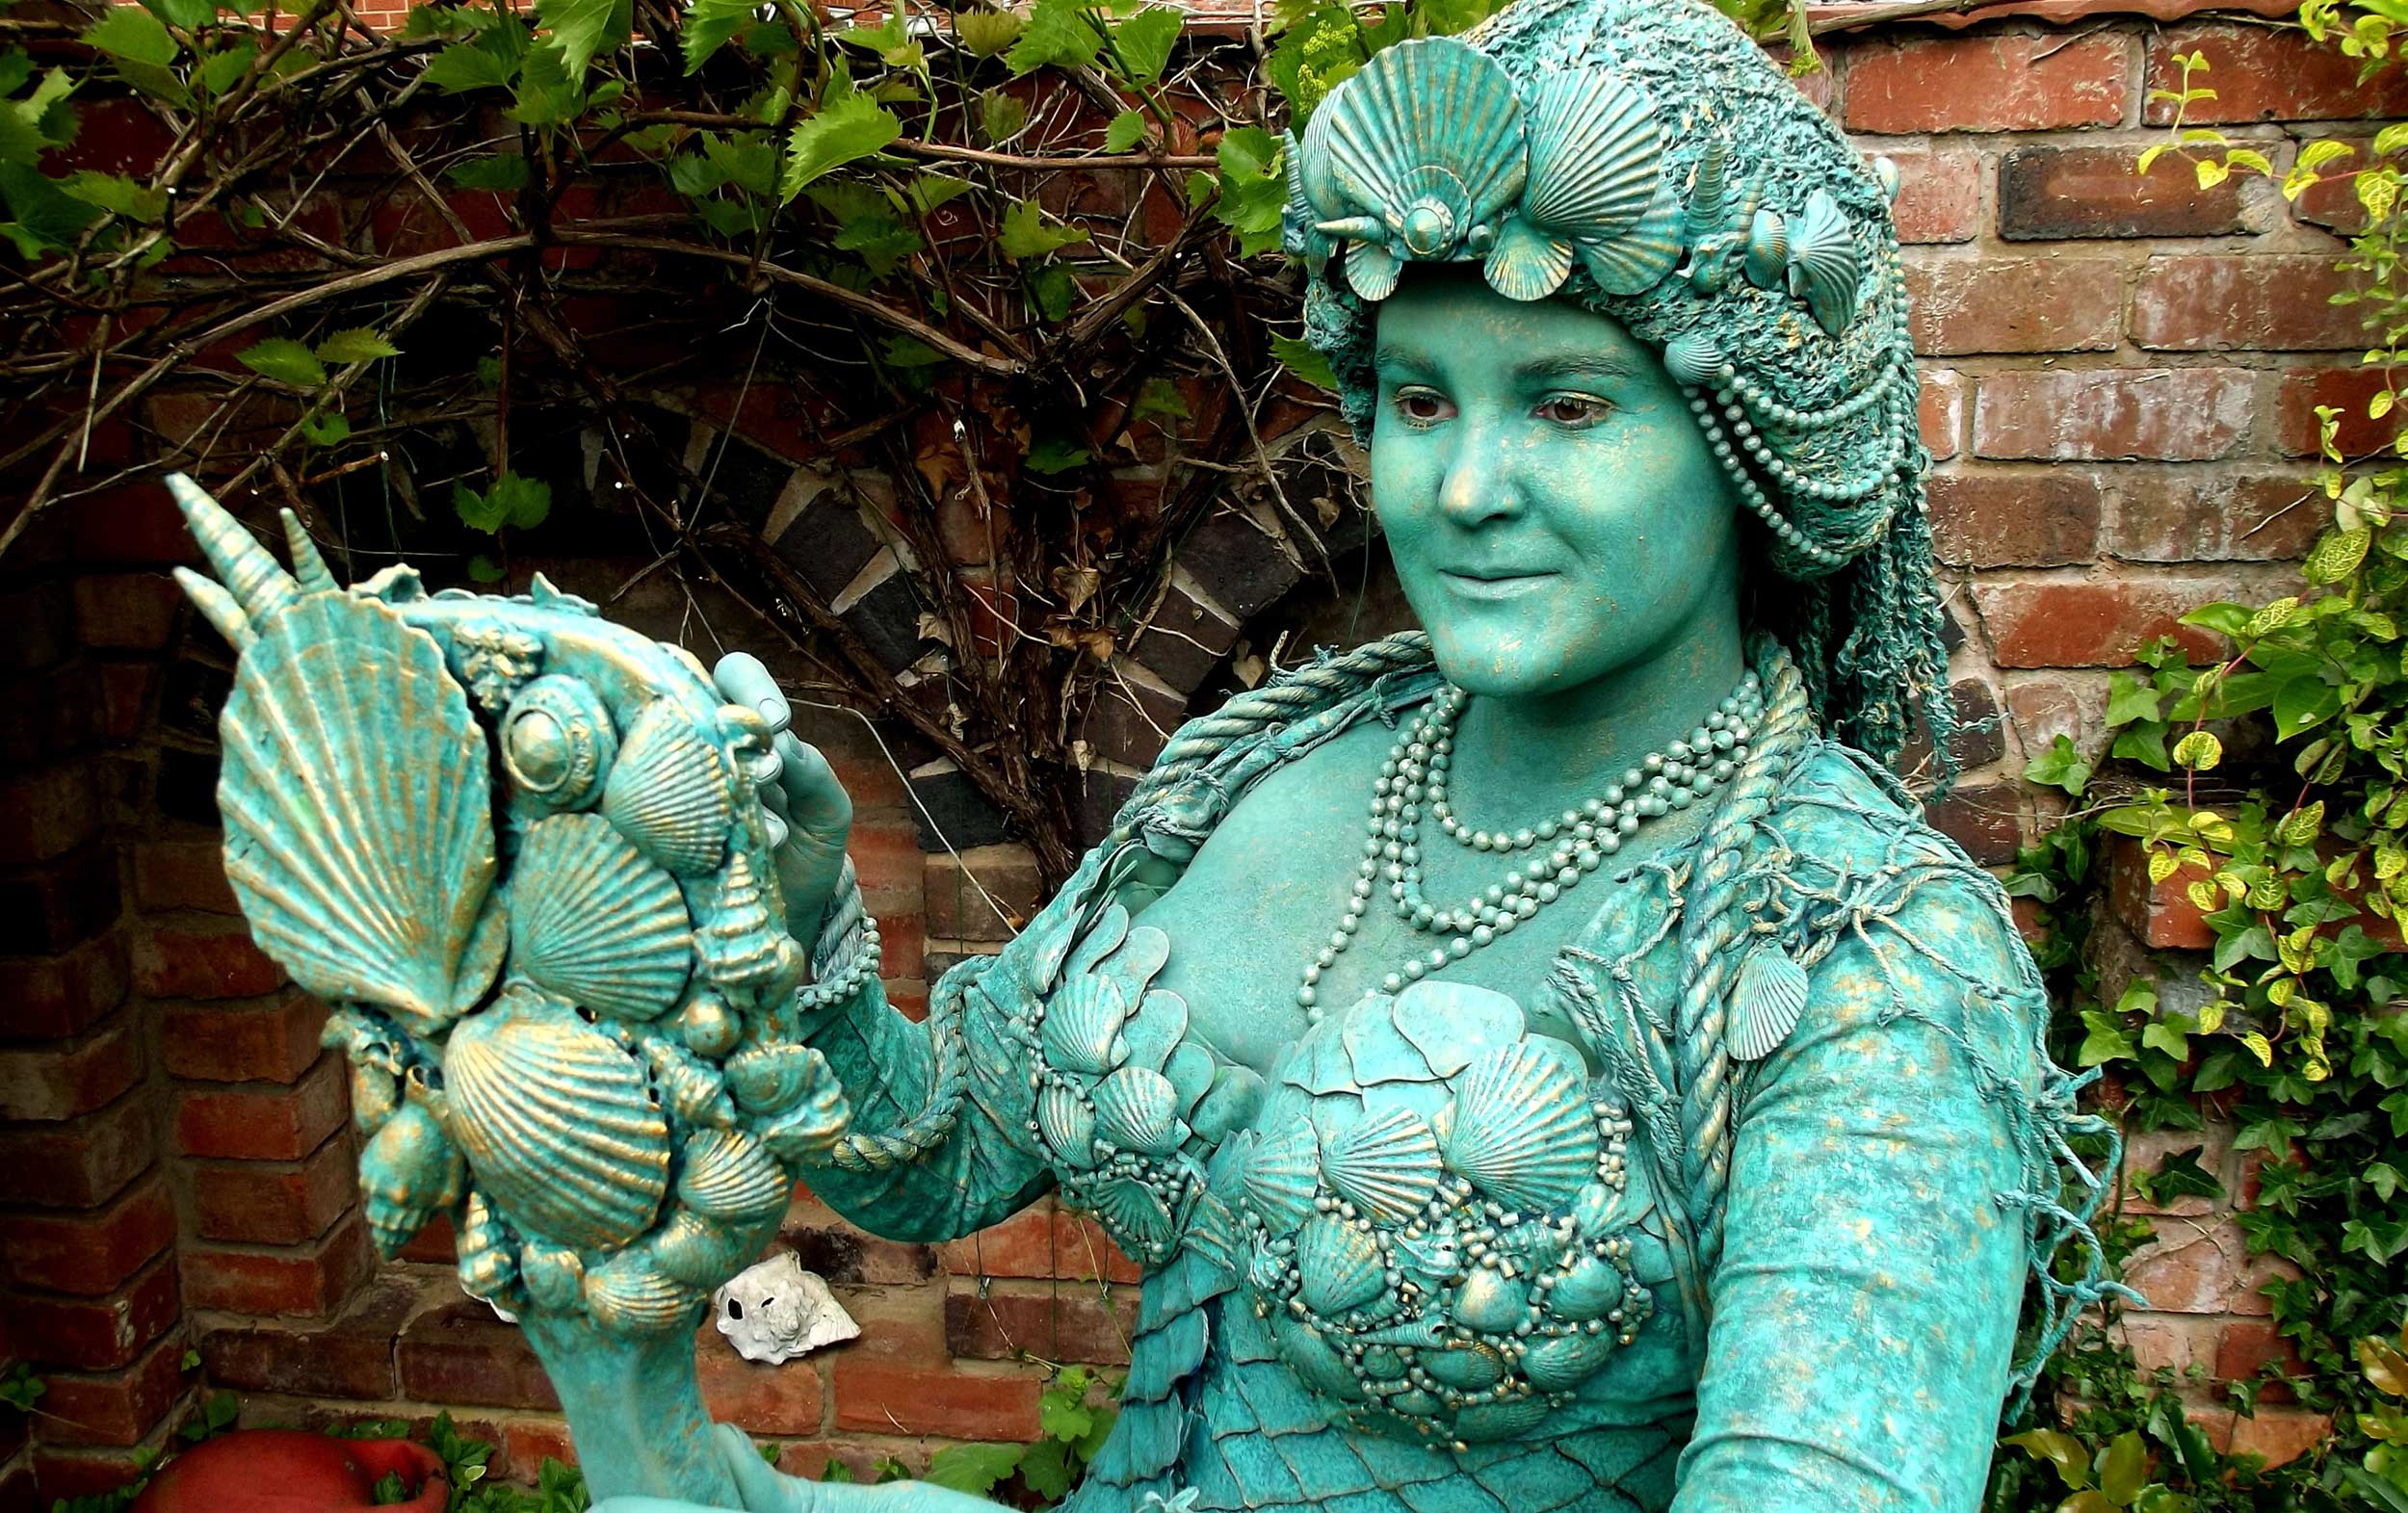 A woman dressed in a mermaid costume maid from recycled plastics and ocean waste.